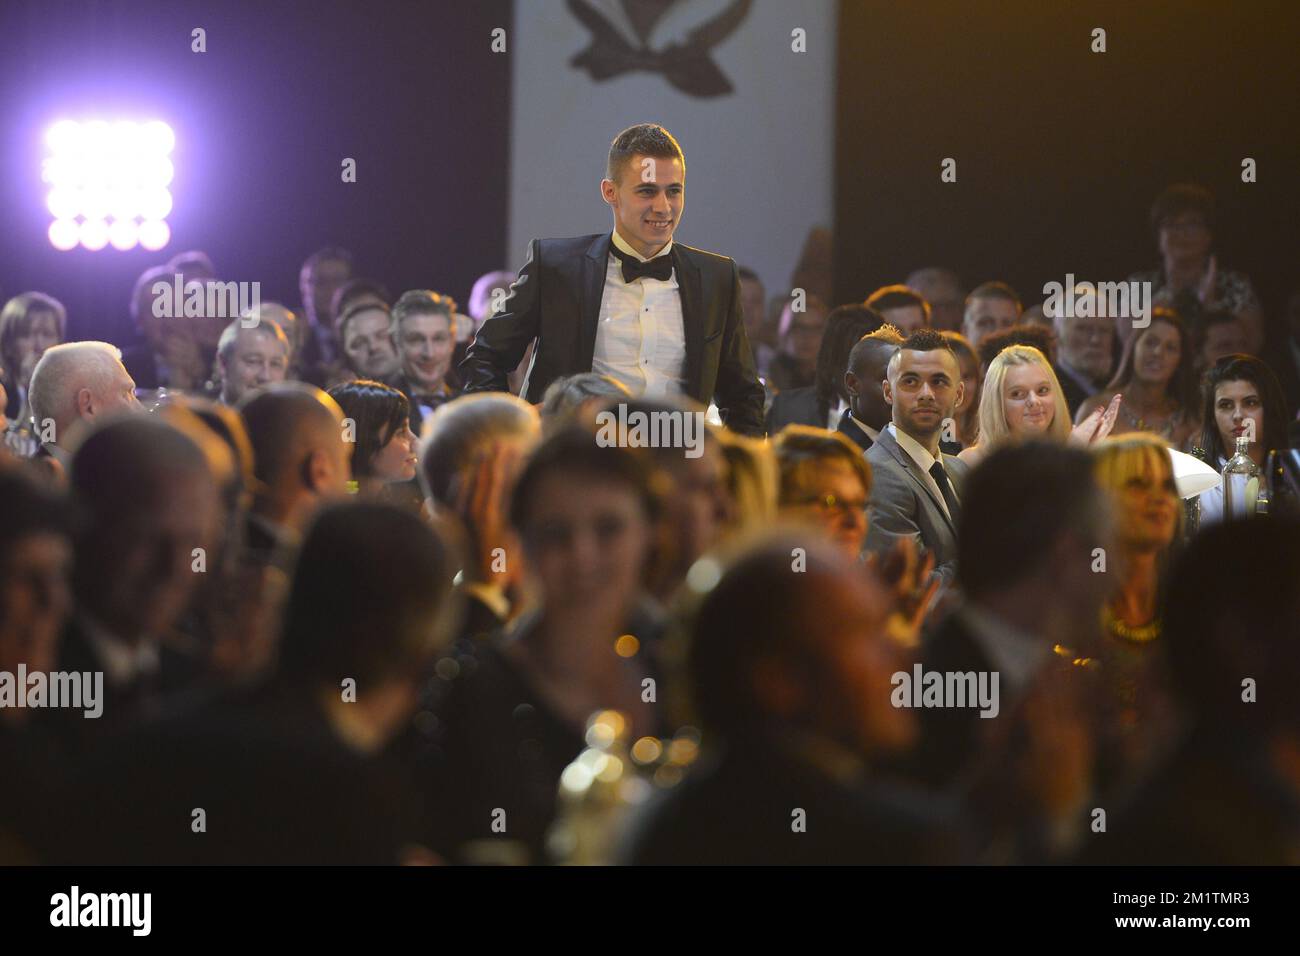 20140122 - LINT, BELGIUM: Essevee's Thorgan Hazard pictured as he wins the 60th edition of the 'Golden Shoe' award ceremony, Wednesday 22 January 2014, in Lint. The Golden Shoe (Gouden Schoen / Soulier d'Or) is an award for the best soccer player of the Belgian Jupiler Pro League championship during the calender year 2013. BELGA PHOTO DIRK WAEM Stock Photo